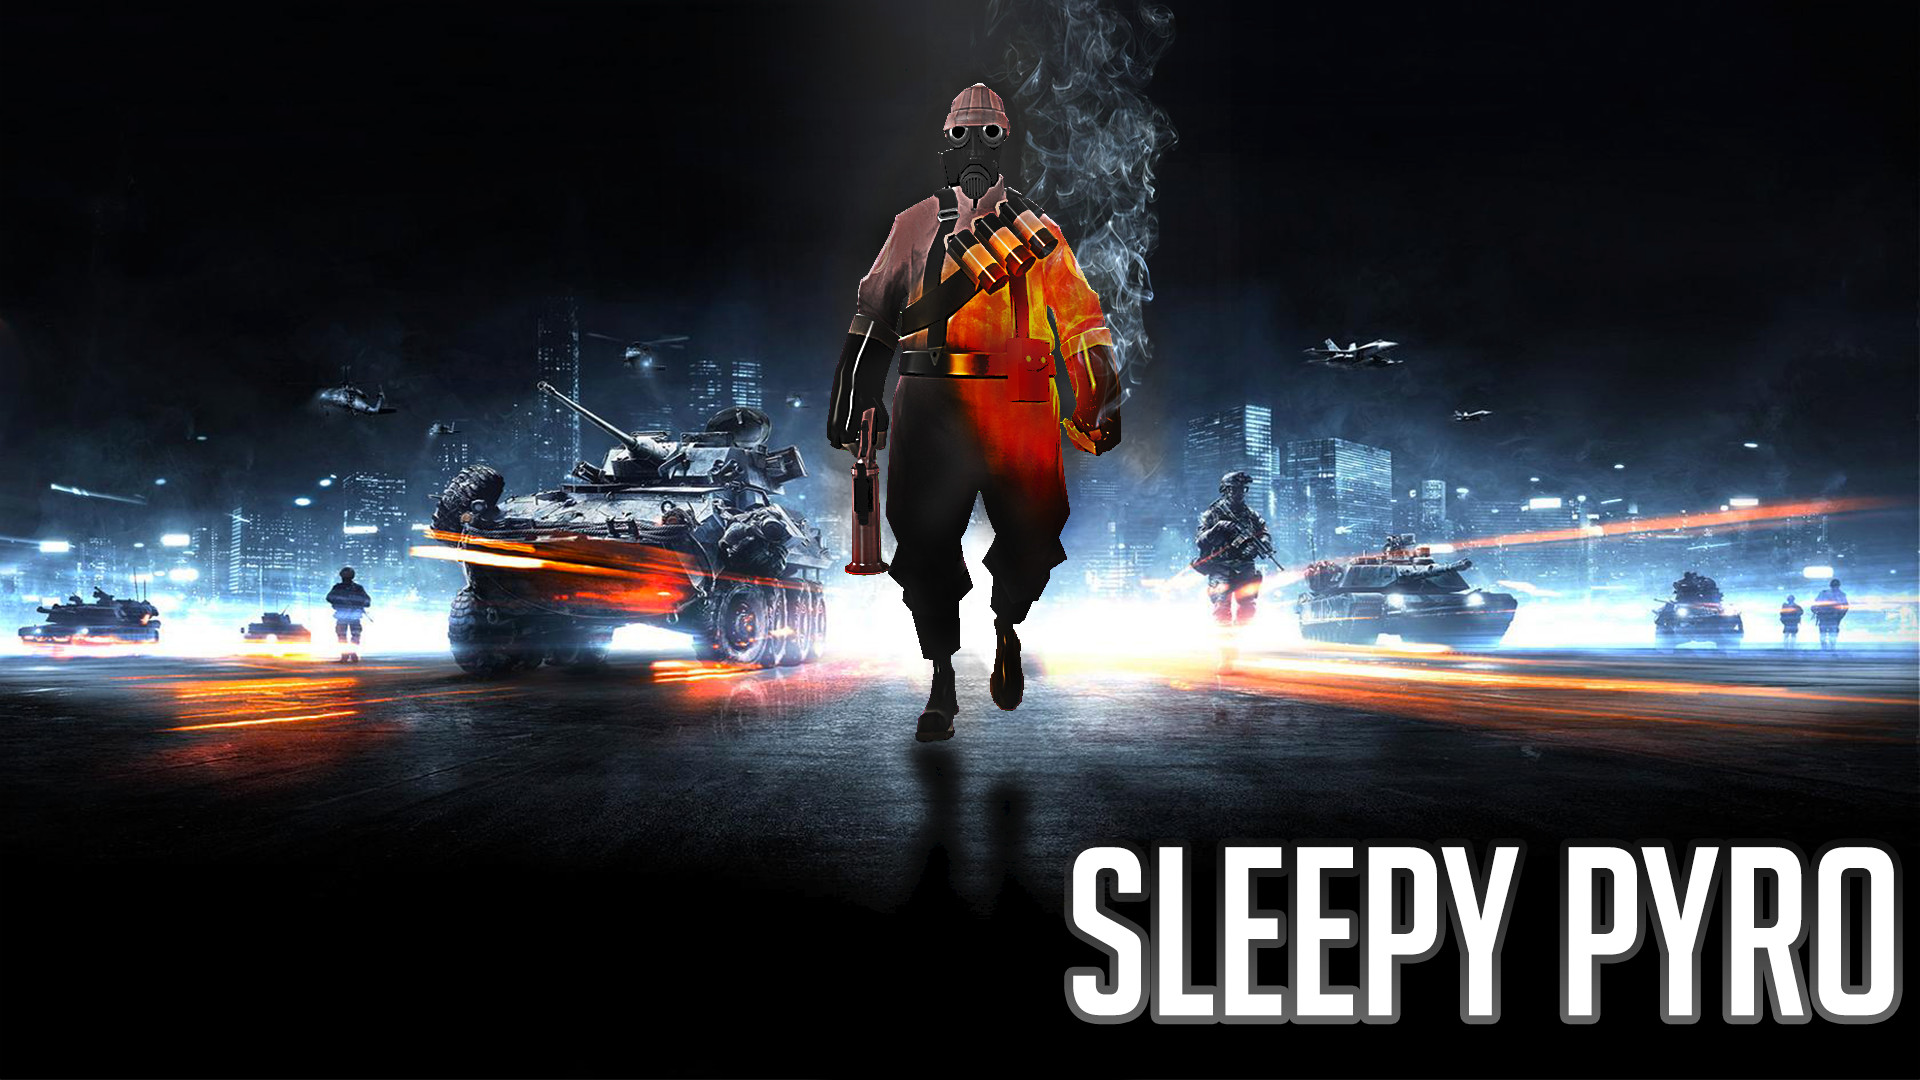 1920x1080 ... Blast from the past:Sleepy Pyro Wallpaper by DazzioN